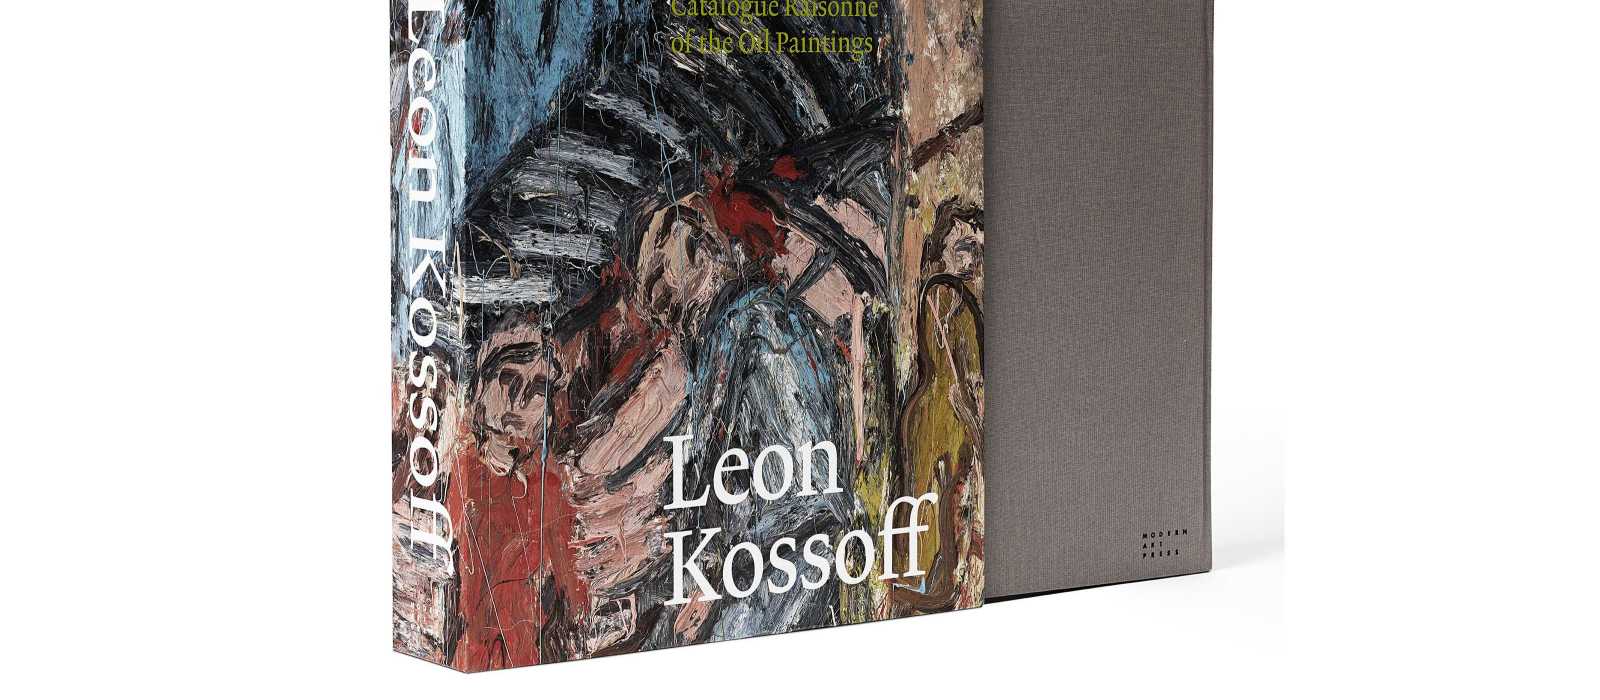 Launch of 'Leon Kossoff: Catalogue Raisonné of the Oil Paintings' in London, 3 November 2021